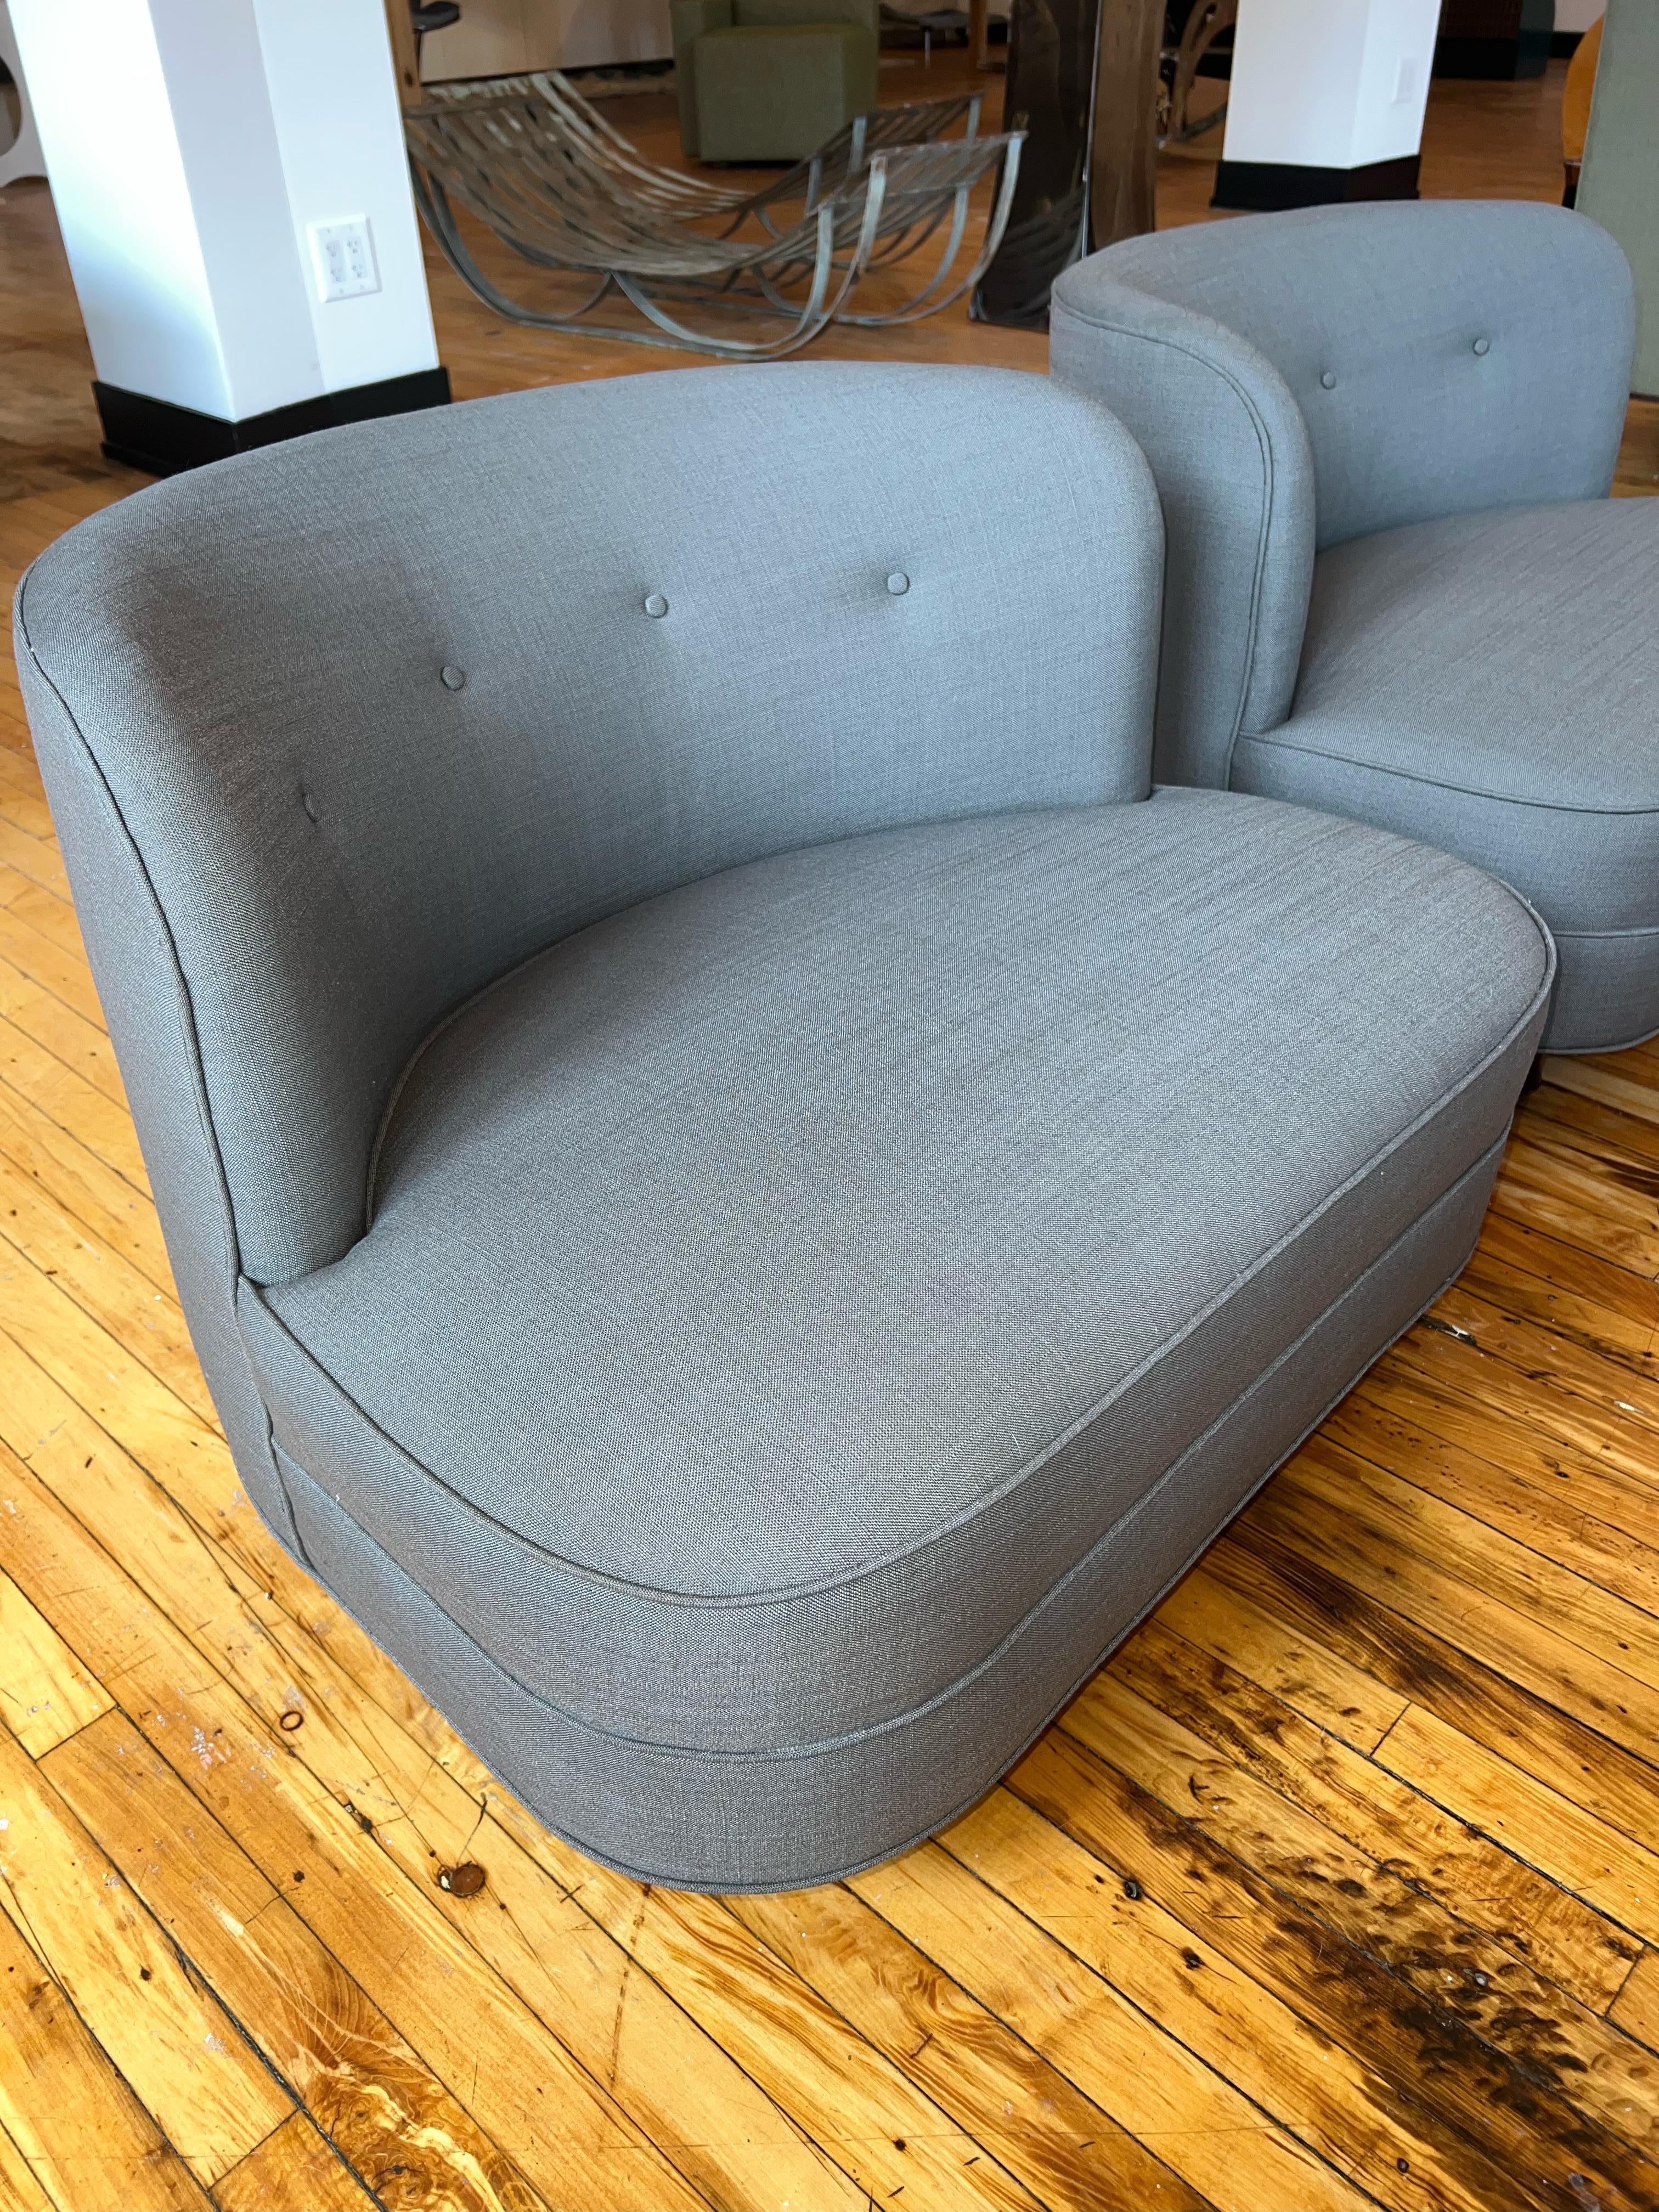 Gilbert Rhode Midcentury Modern Grey Slipper Low Low Lounge Chairs Pair In Good Condition For Sale In Chicago, IL